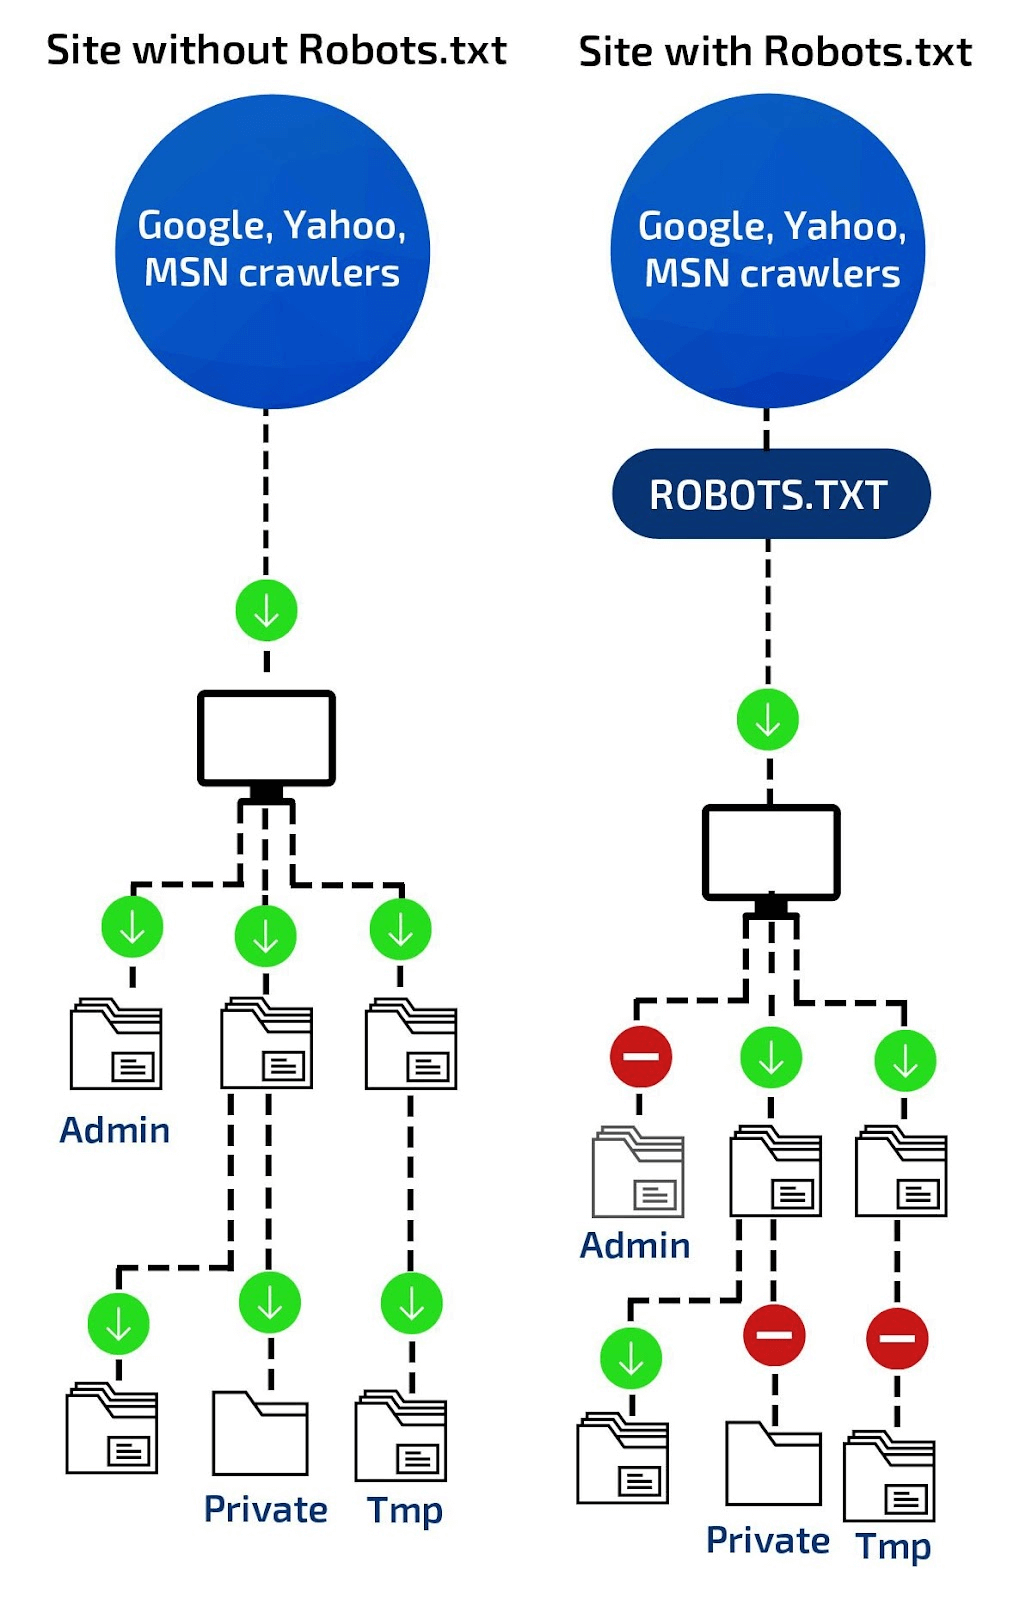 The workflow of robots files